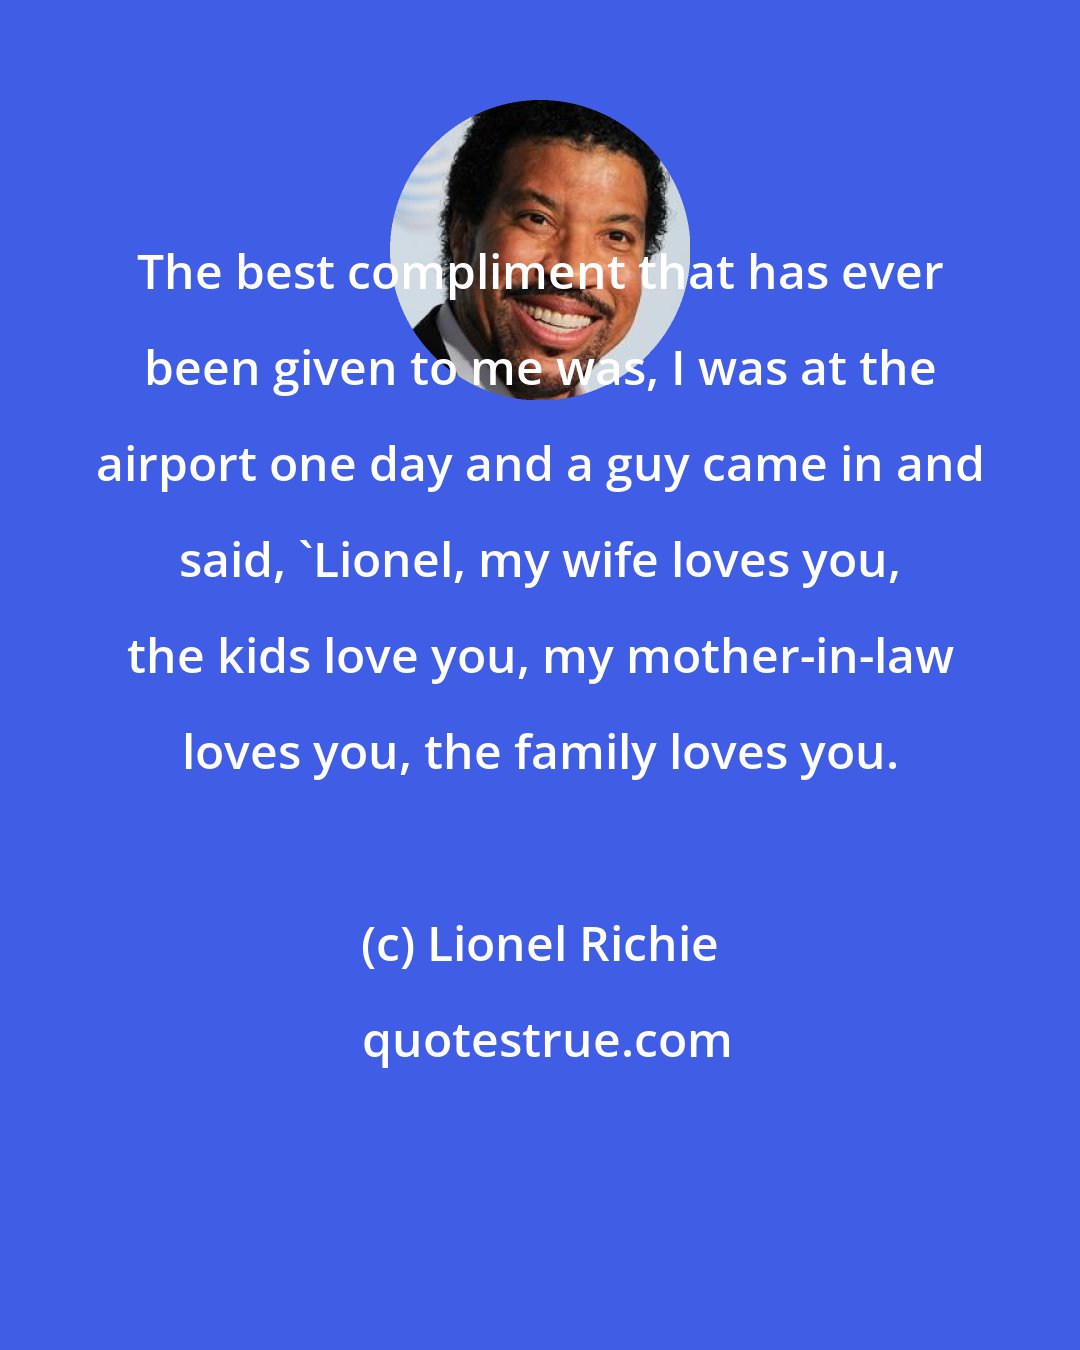 Lionel Richie: The best compliment that has ever been given to me was, I was at the airport one day and a guy came in and said, 'Lionel, my wife loves you, the kids love you, my mother-in-law loves you, the family loves you.